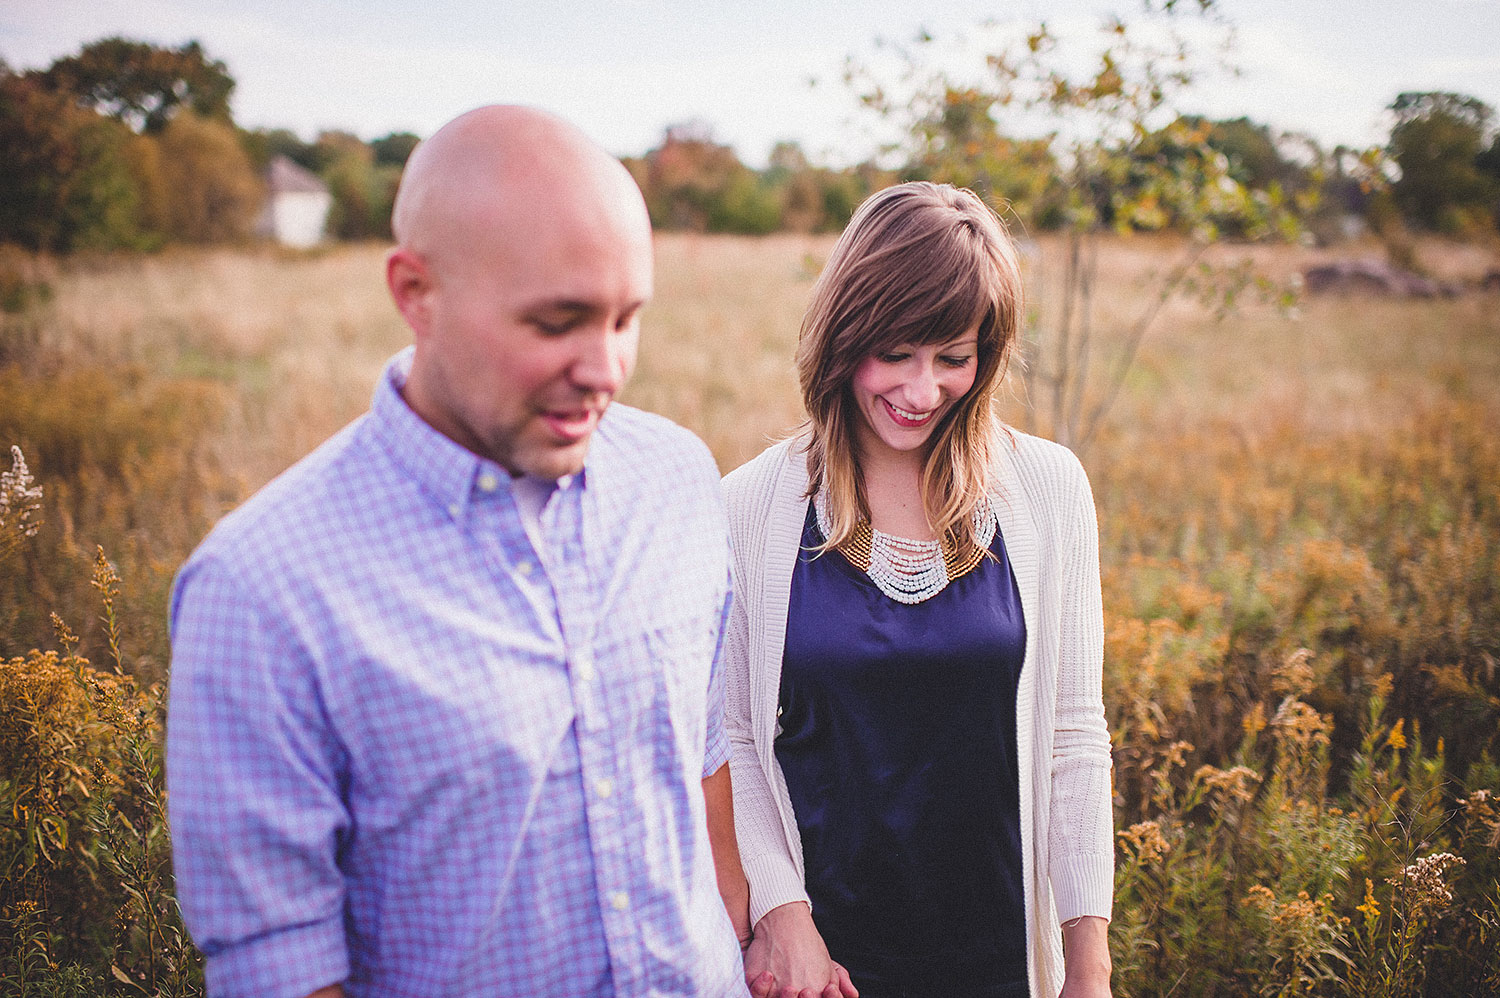 pat-robinson-photography-wilmington-engagement-session-6-2.jpg